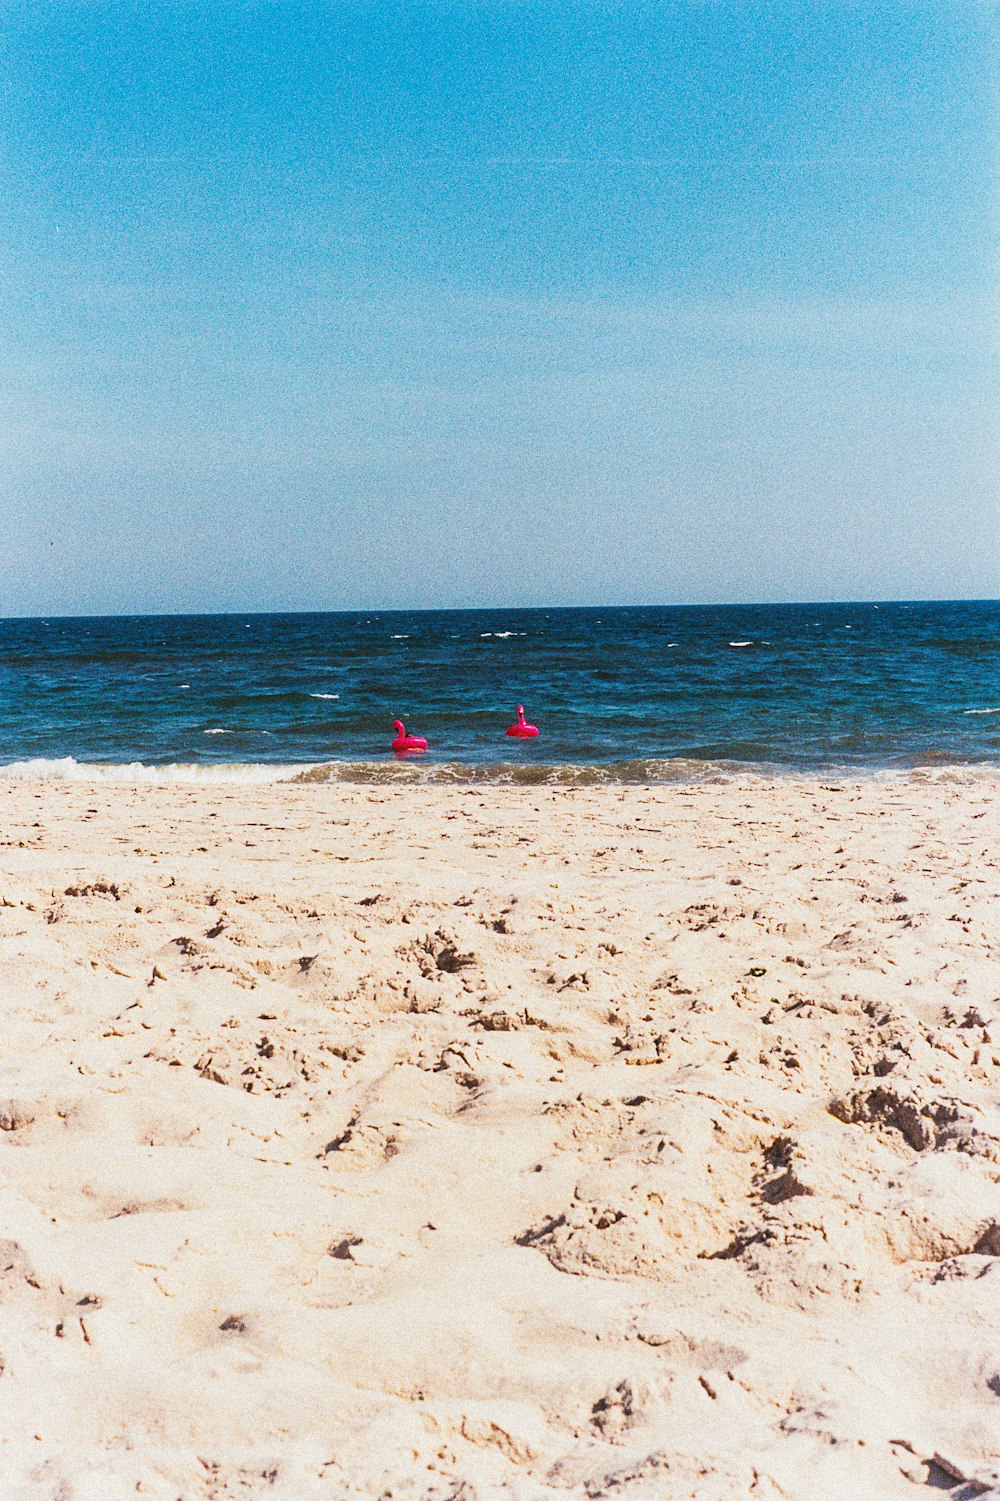 person in red shirt standing on beach during daytime